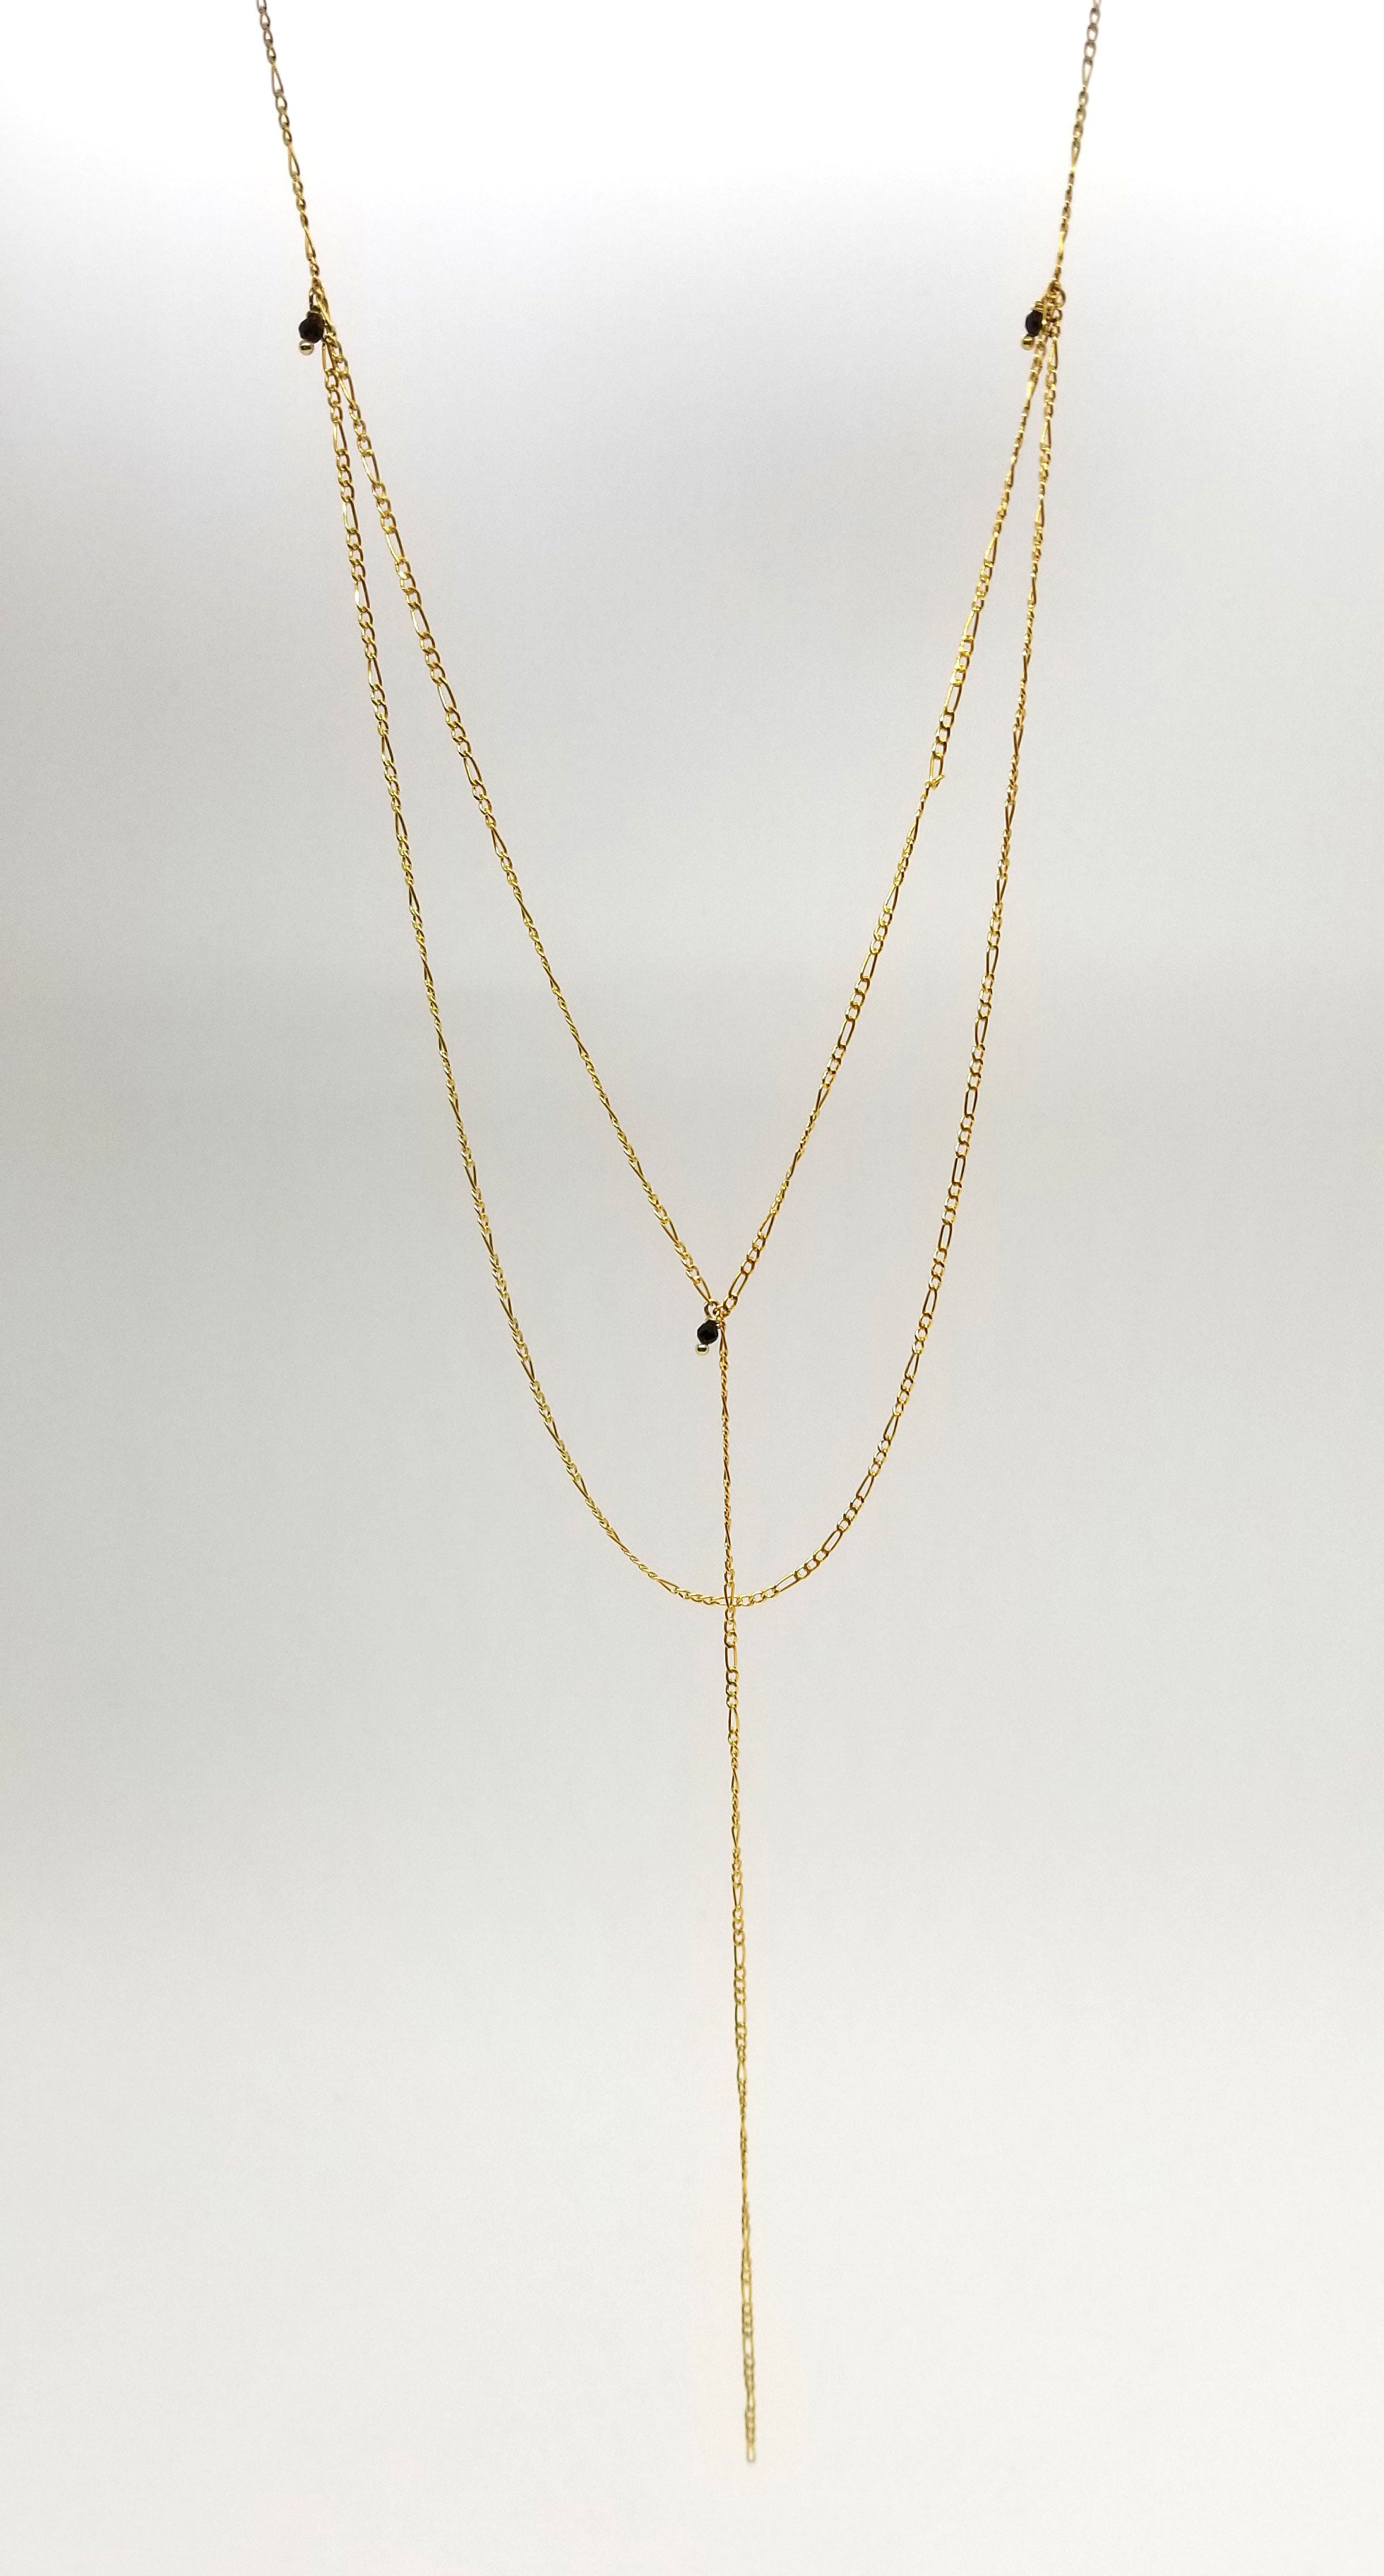 The Dobbelt Layer Gold Necklace